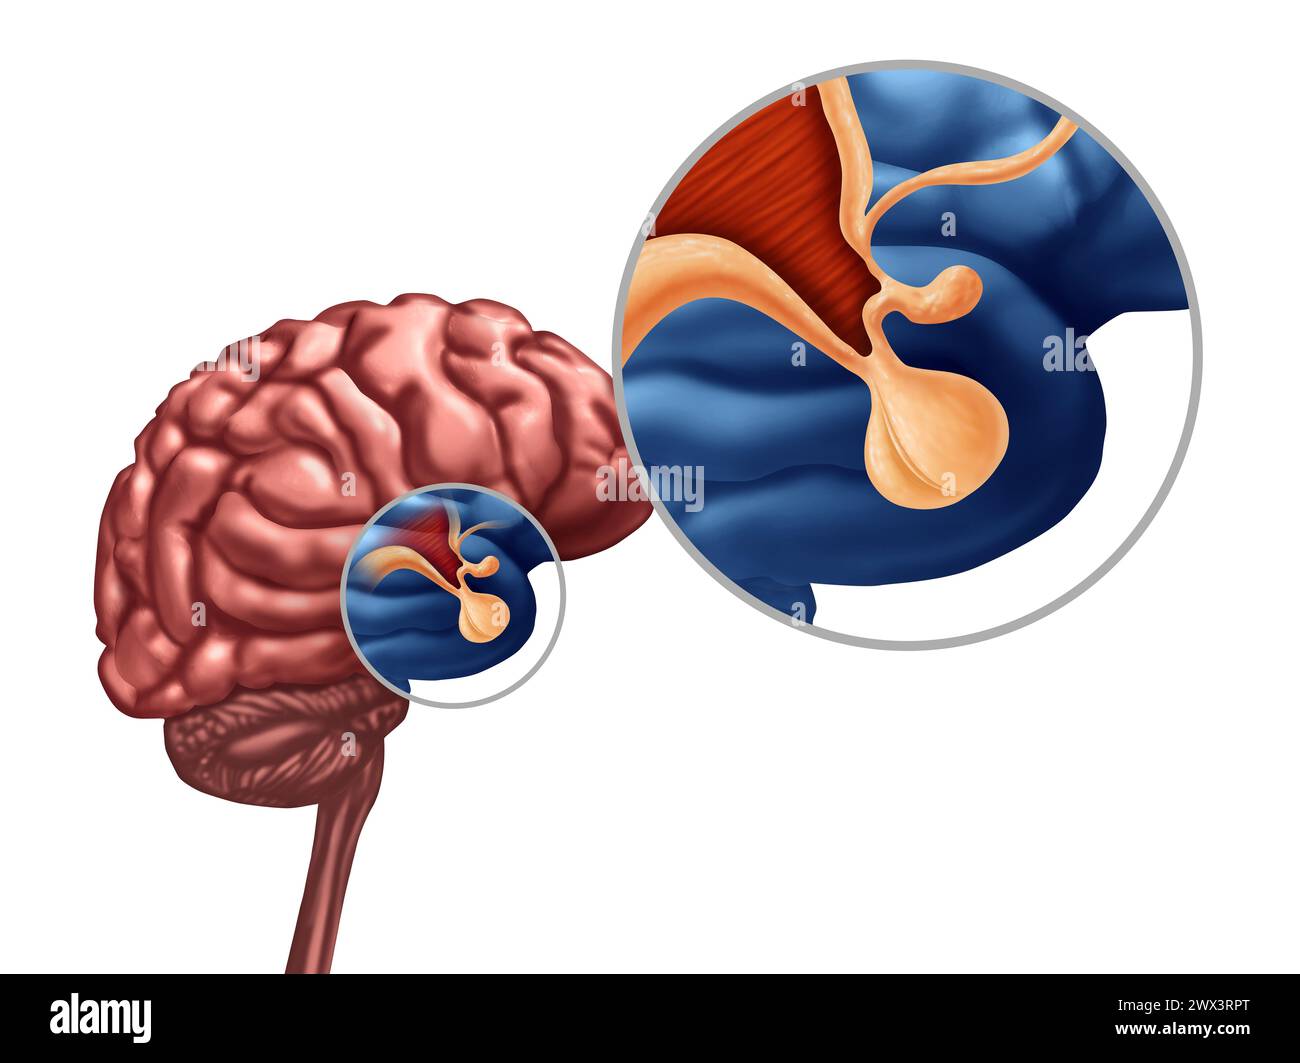 Pituitary Gland or Hypothalamus or hypophysis cerebri concept as the endocrine system symbol related to growth hormone as part of the human anatomy. Stock Photo